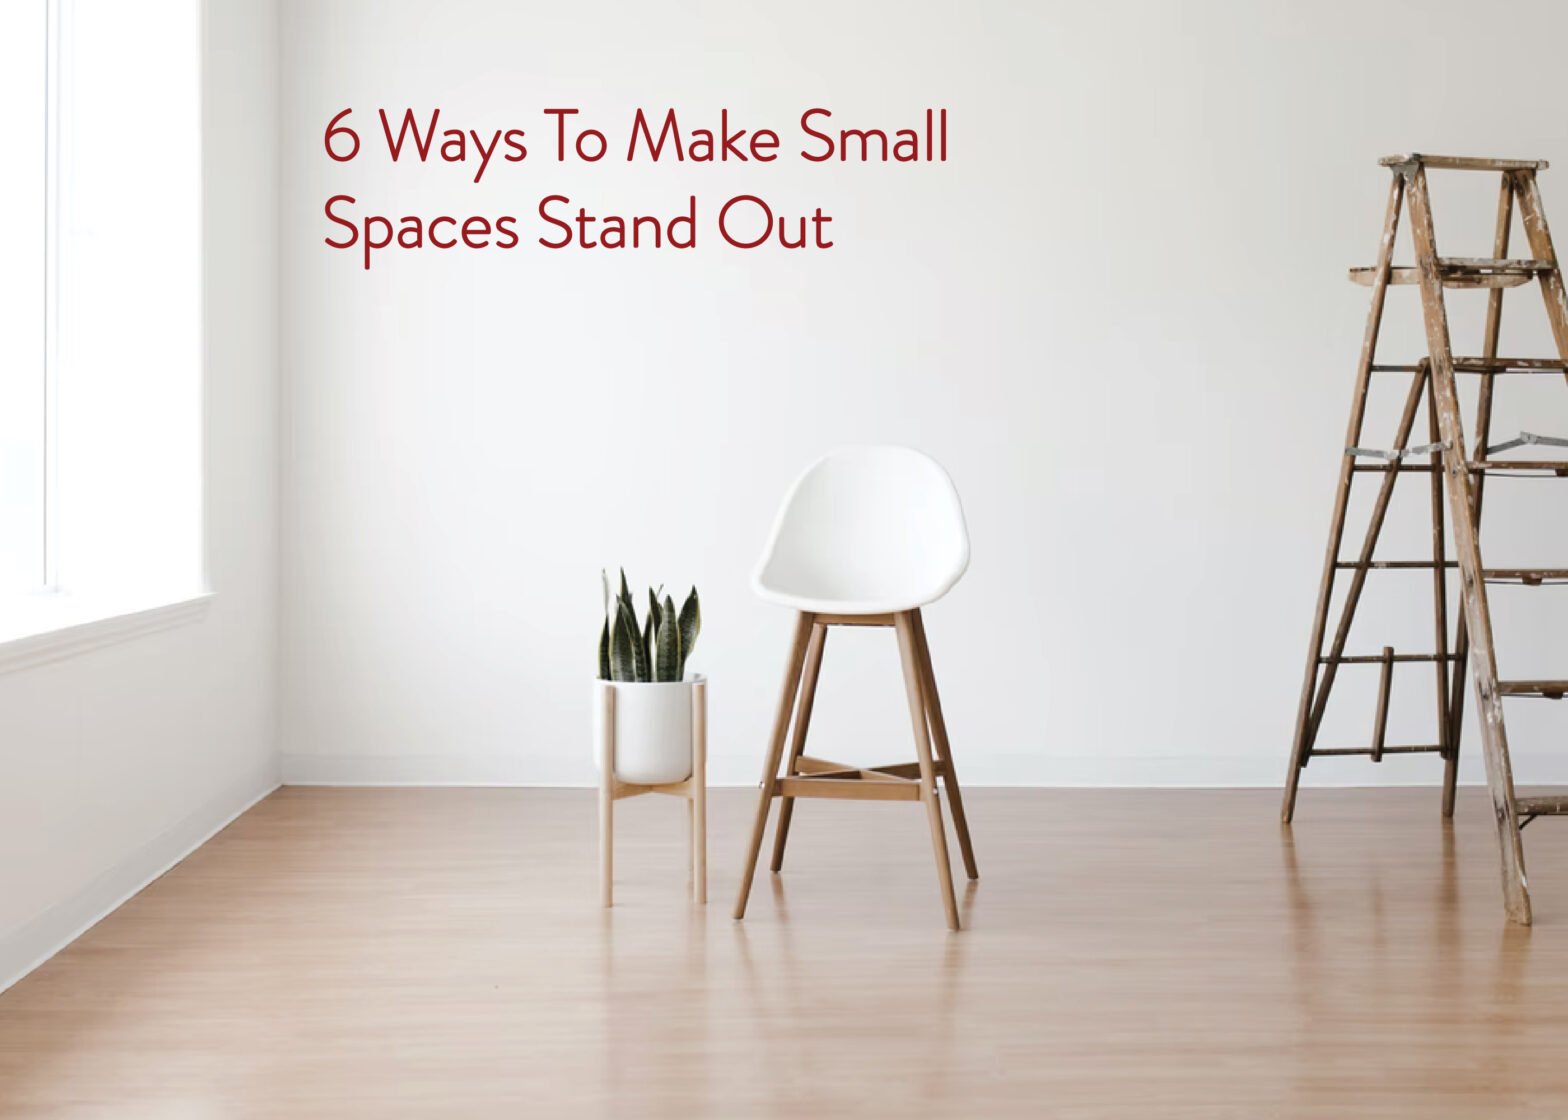 6 Ways To Make Small Spaces Stand Out